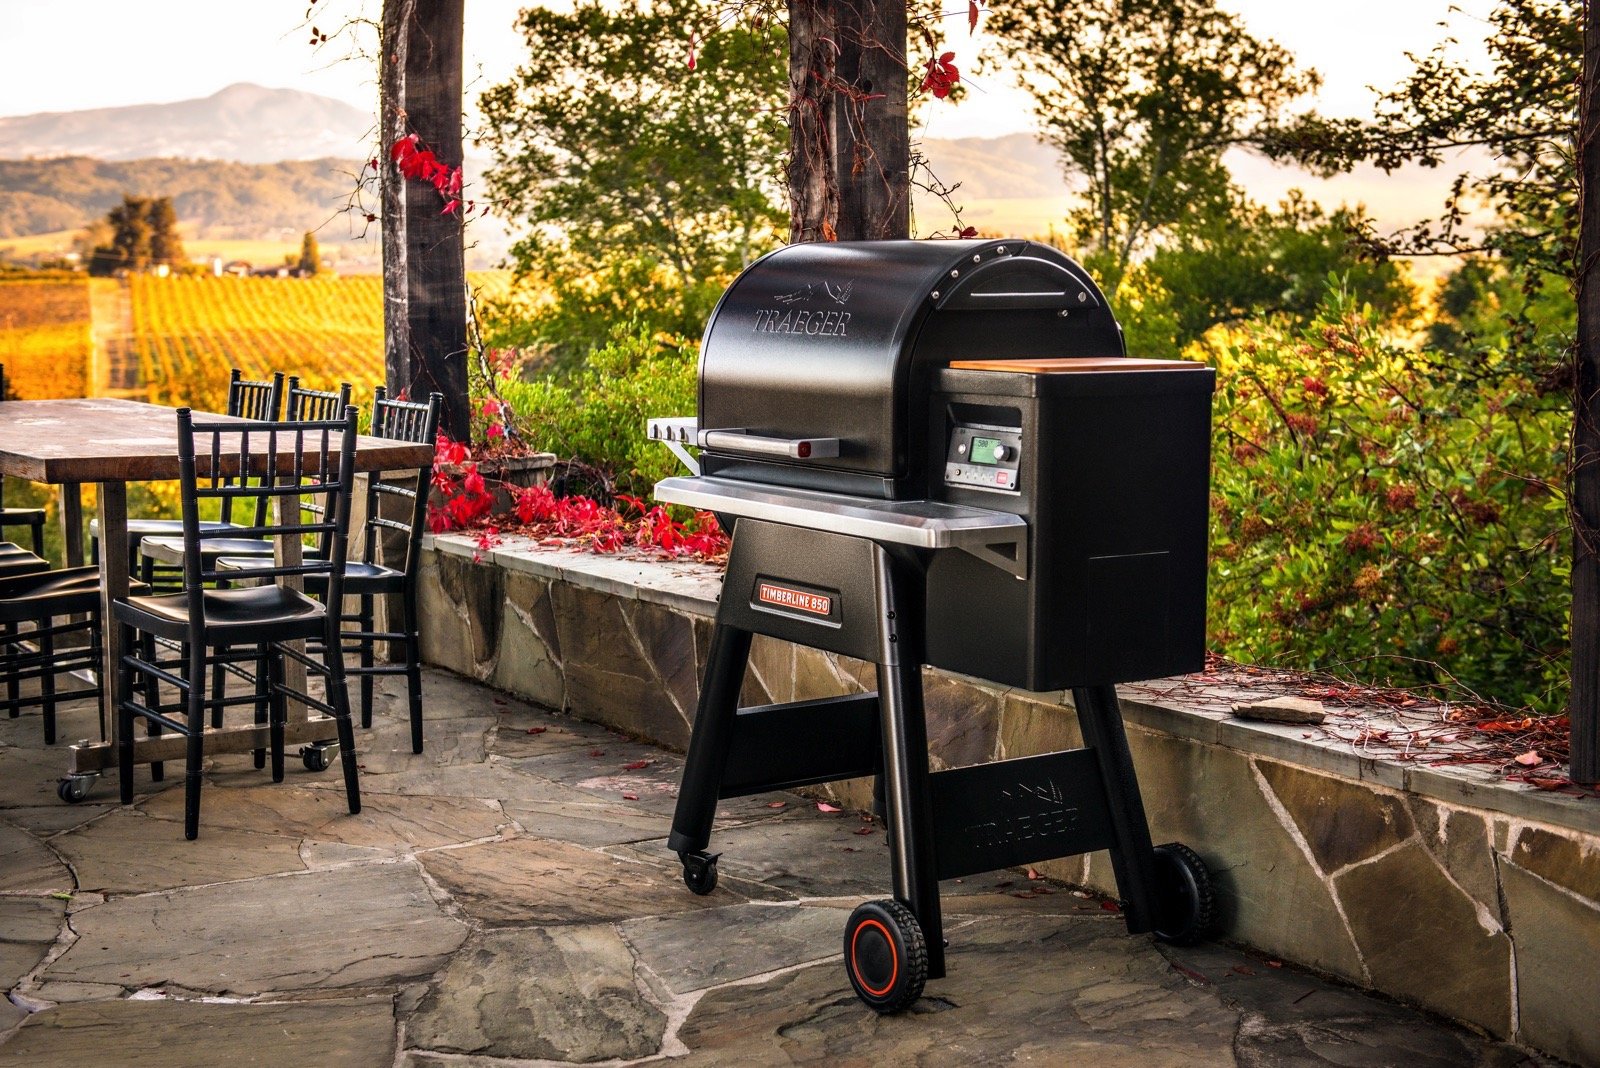 Traeger's 2019 grill lineup